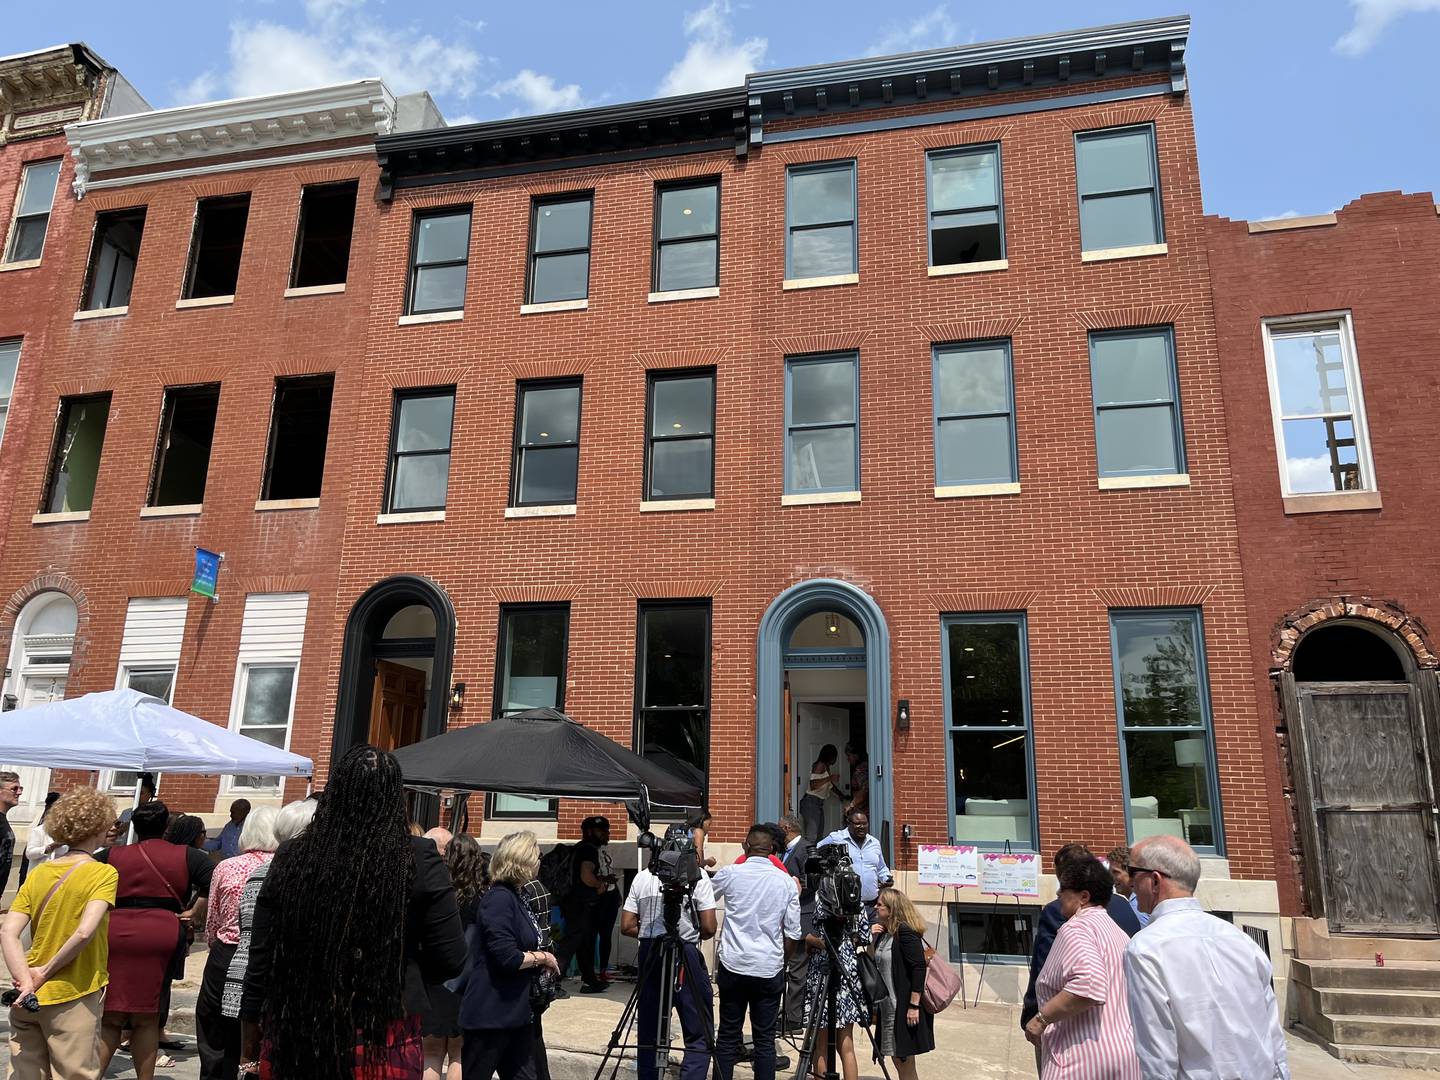 Parity, an equitable housing startup, unveiled two rehabilitated homes in Harlem Park. They plan to redevelop nearly 100 more.